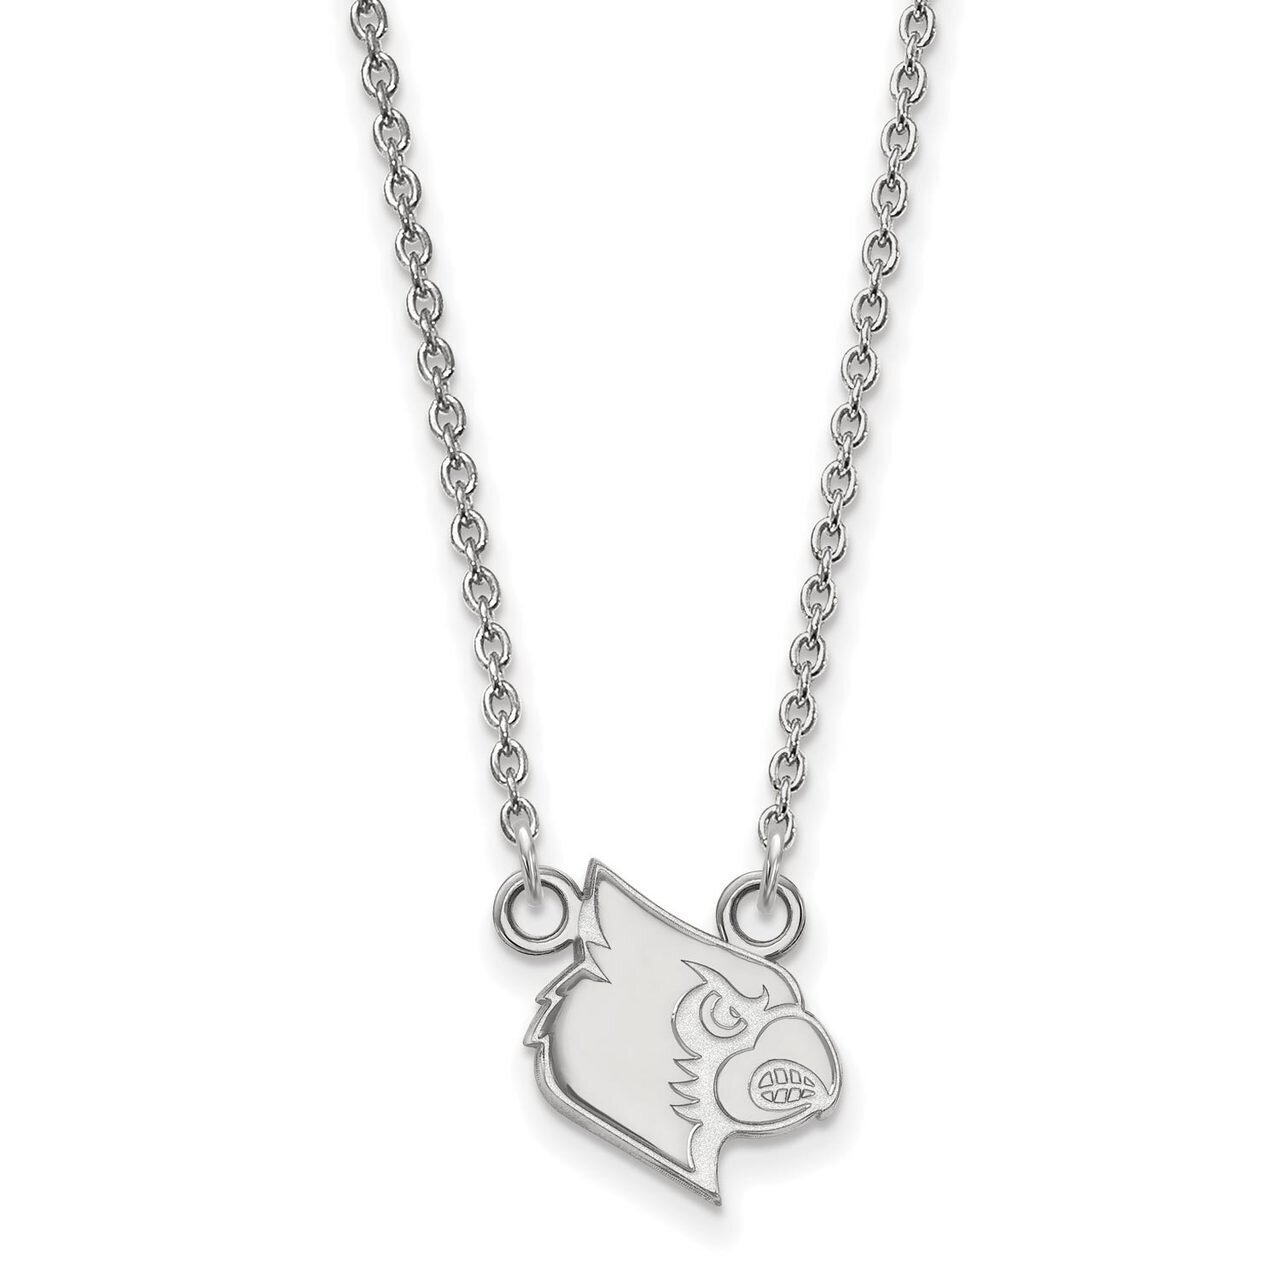 University of Louisville Small Pendant with Chain Necklace 14k White Gold 4W050UL-18